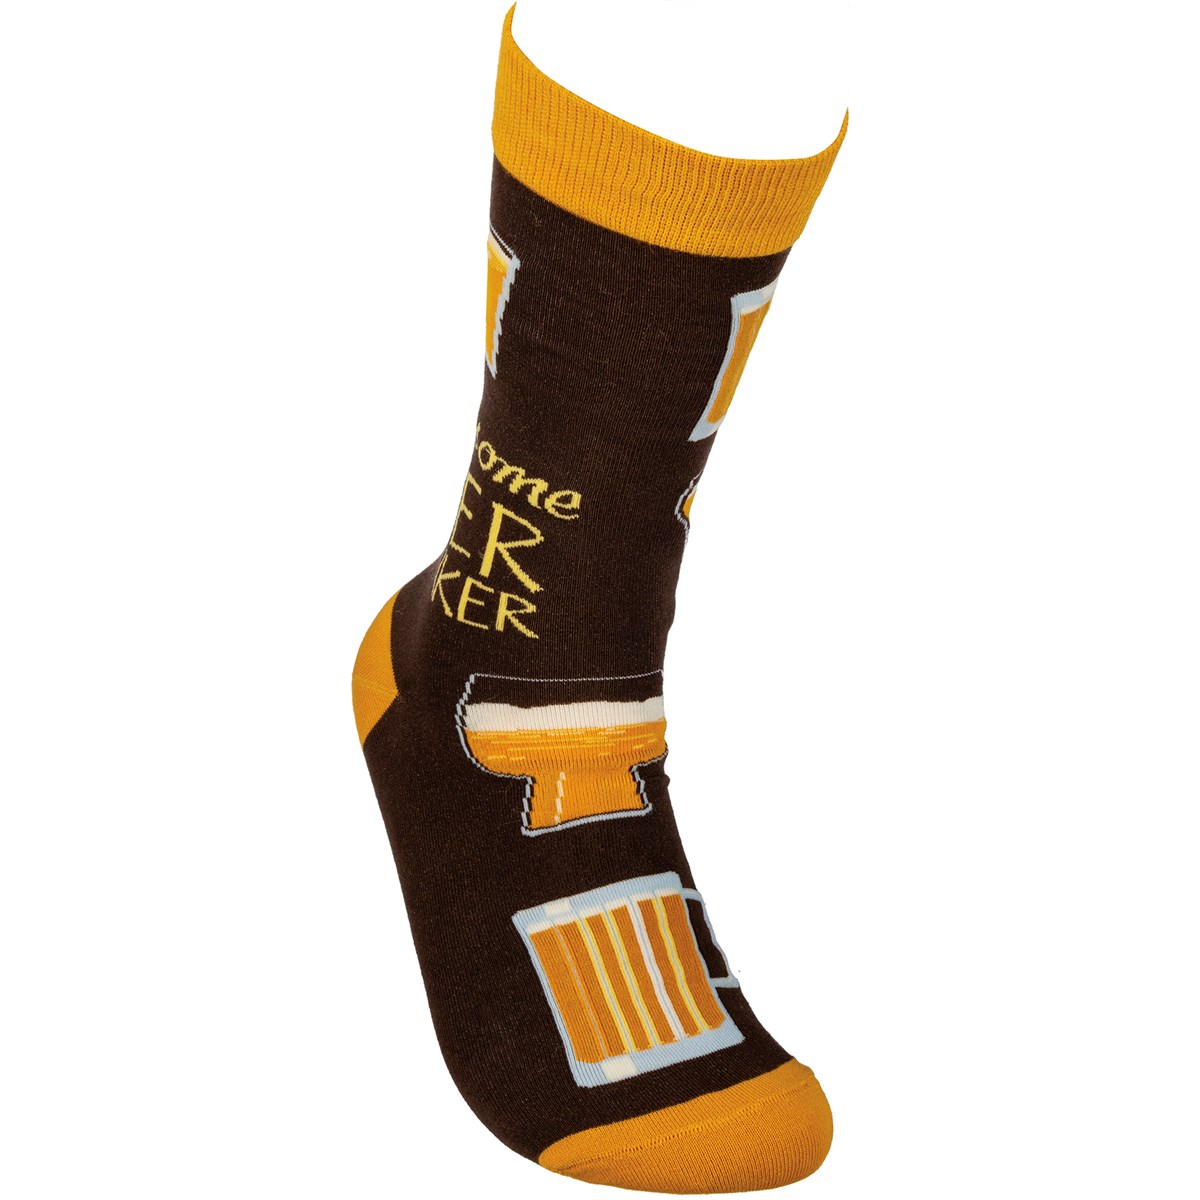 Socks - Awesome Beer Drinker - One Size Fits Most - Cotton, Nylon, Spandex